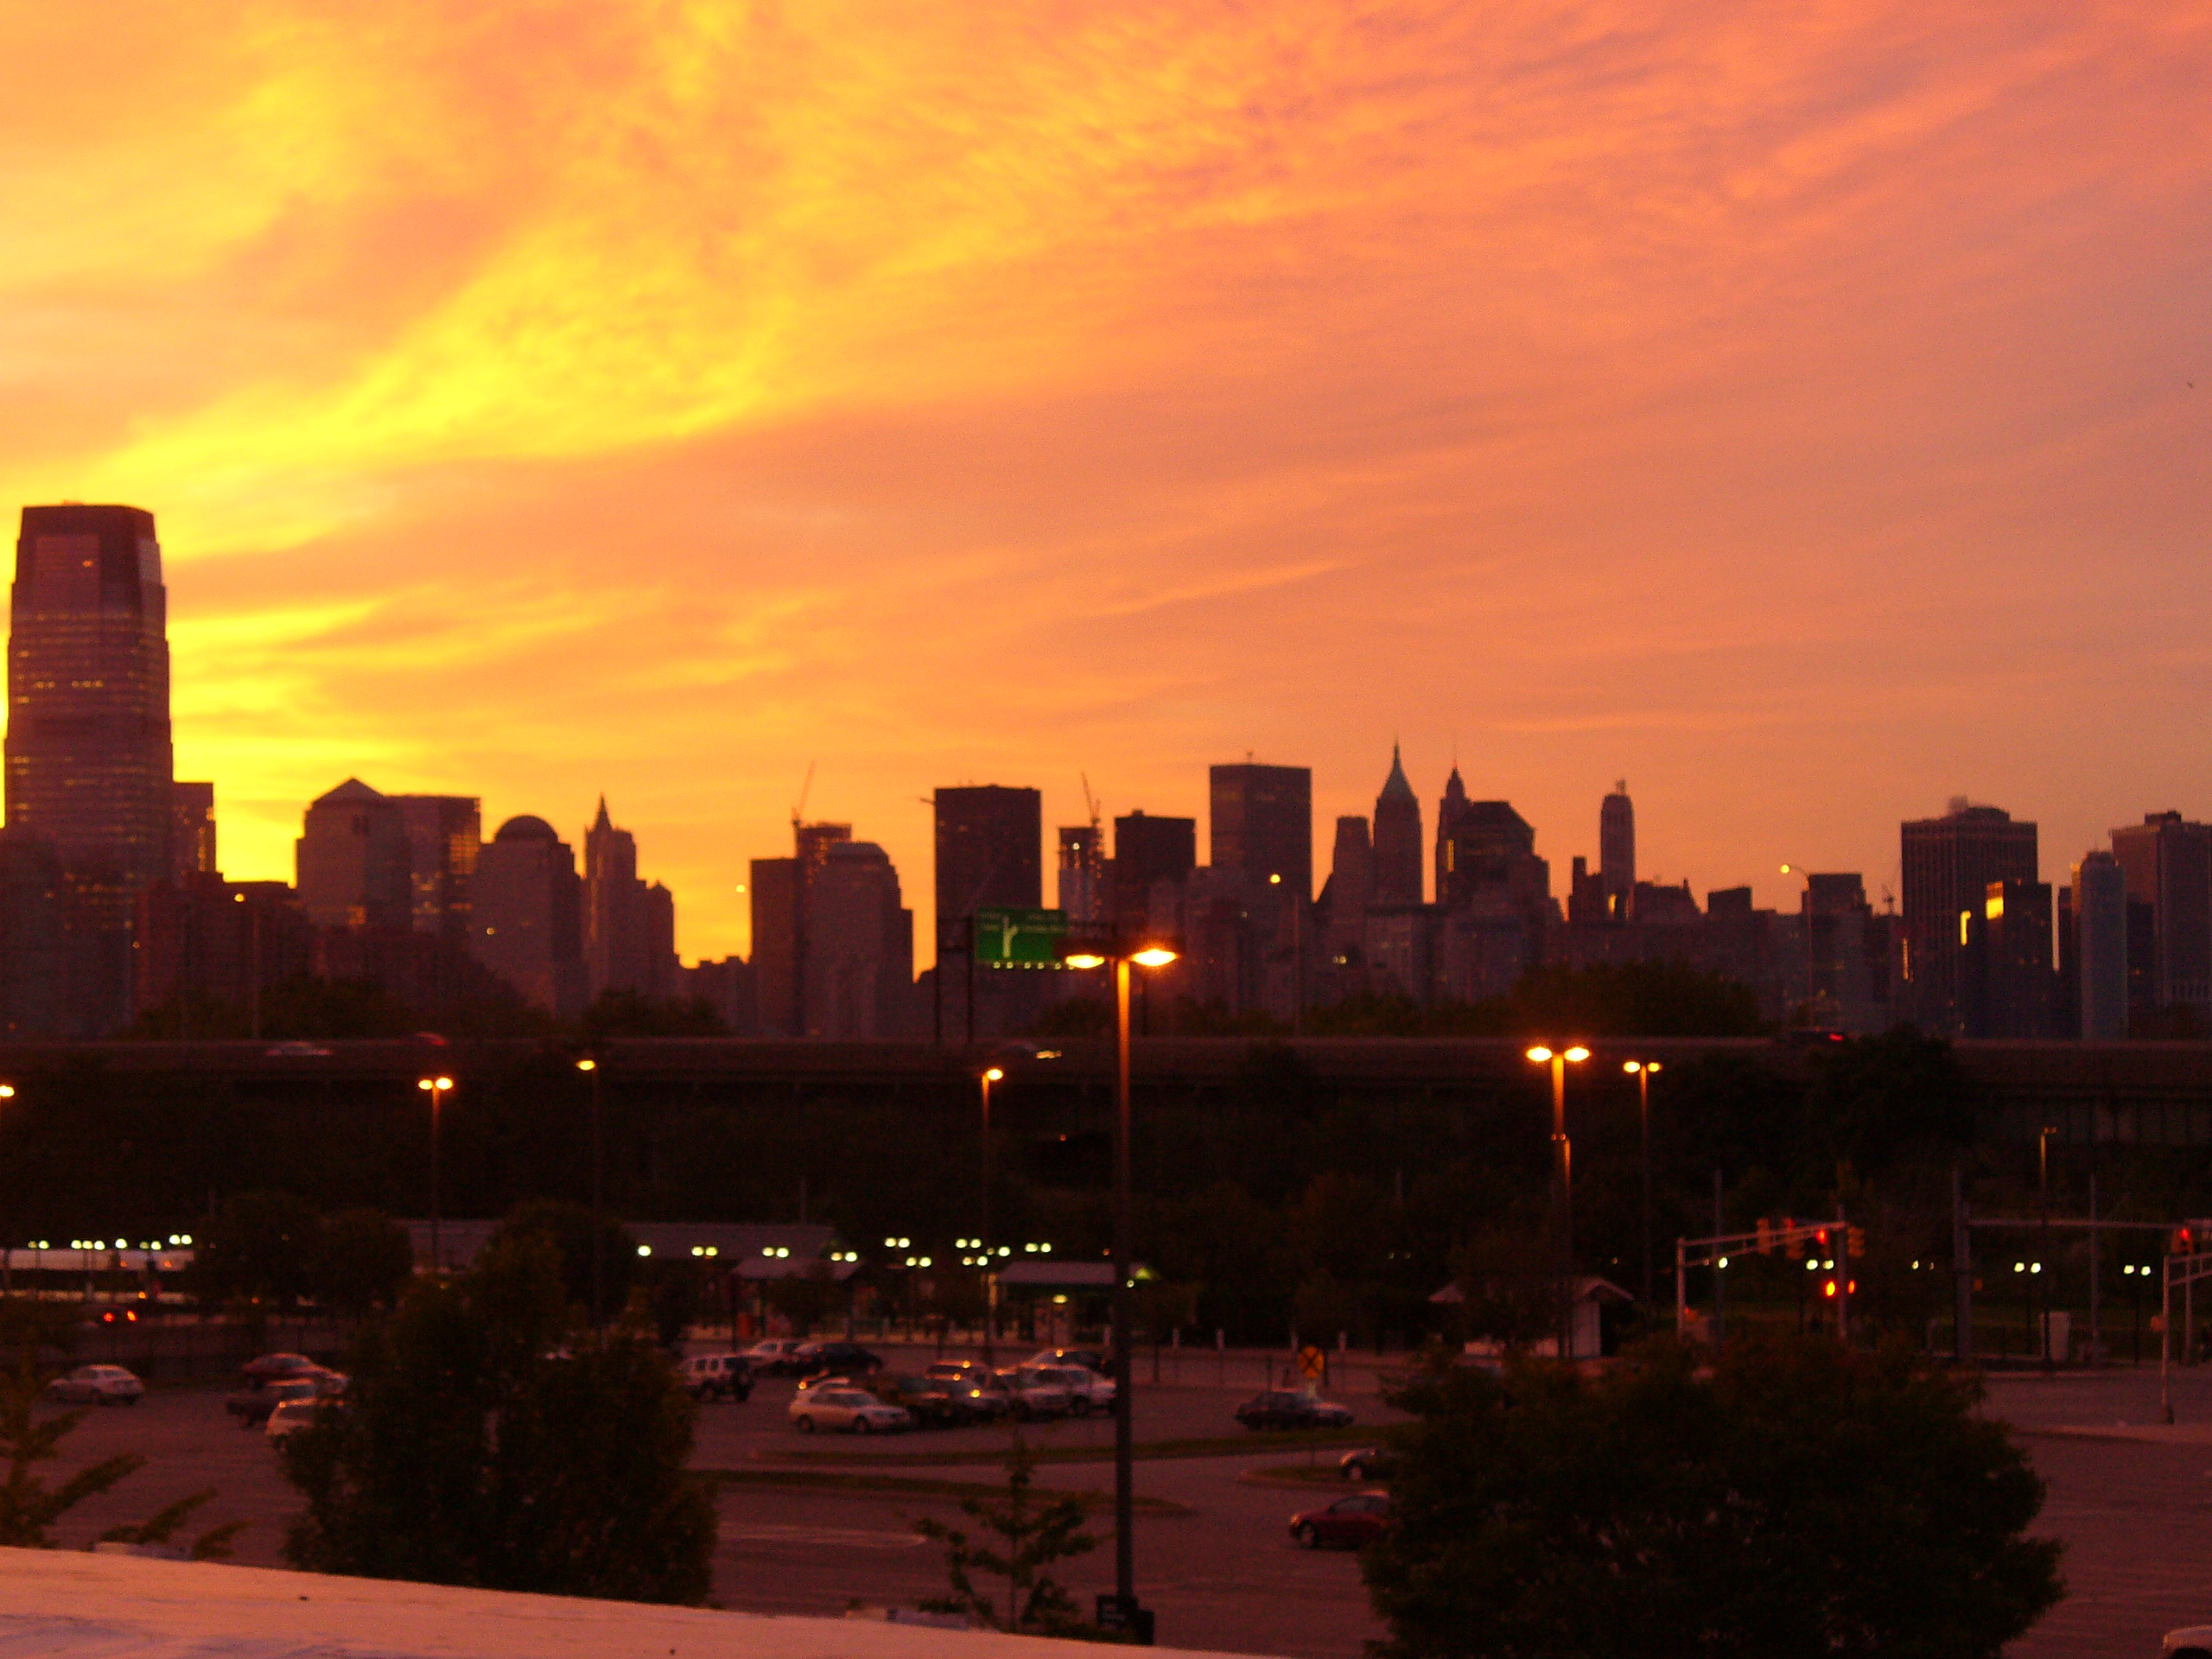 File:Jersey CIty in morning.JPG - Wikimedia Commons